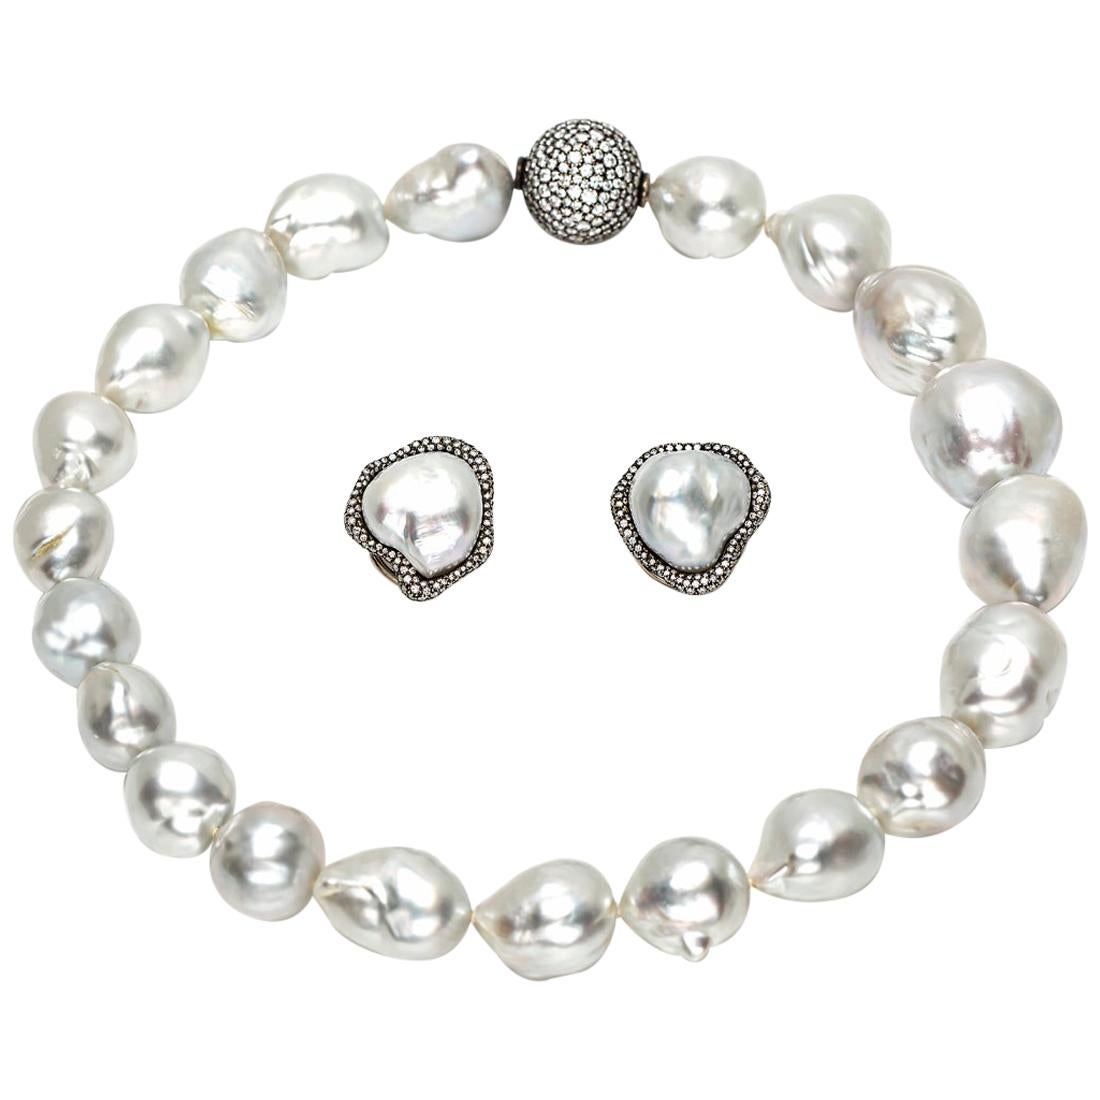 Diamond and South Sea Pearl Necklace and Earrings